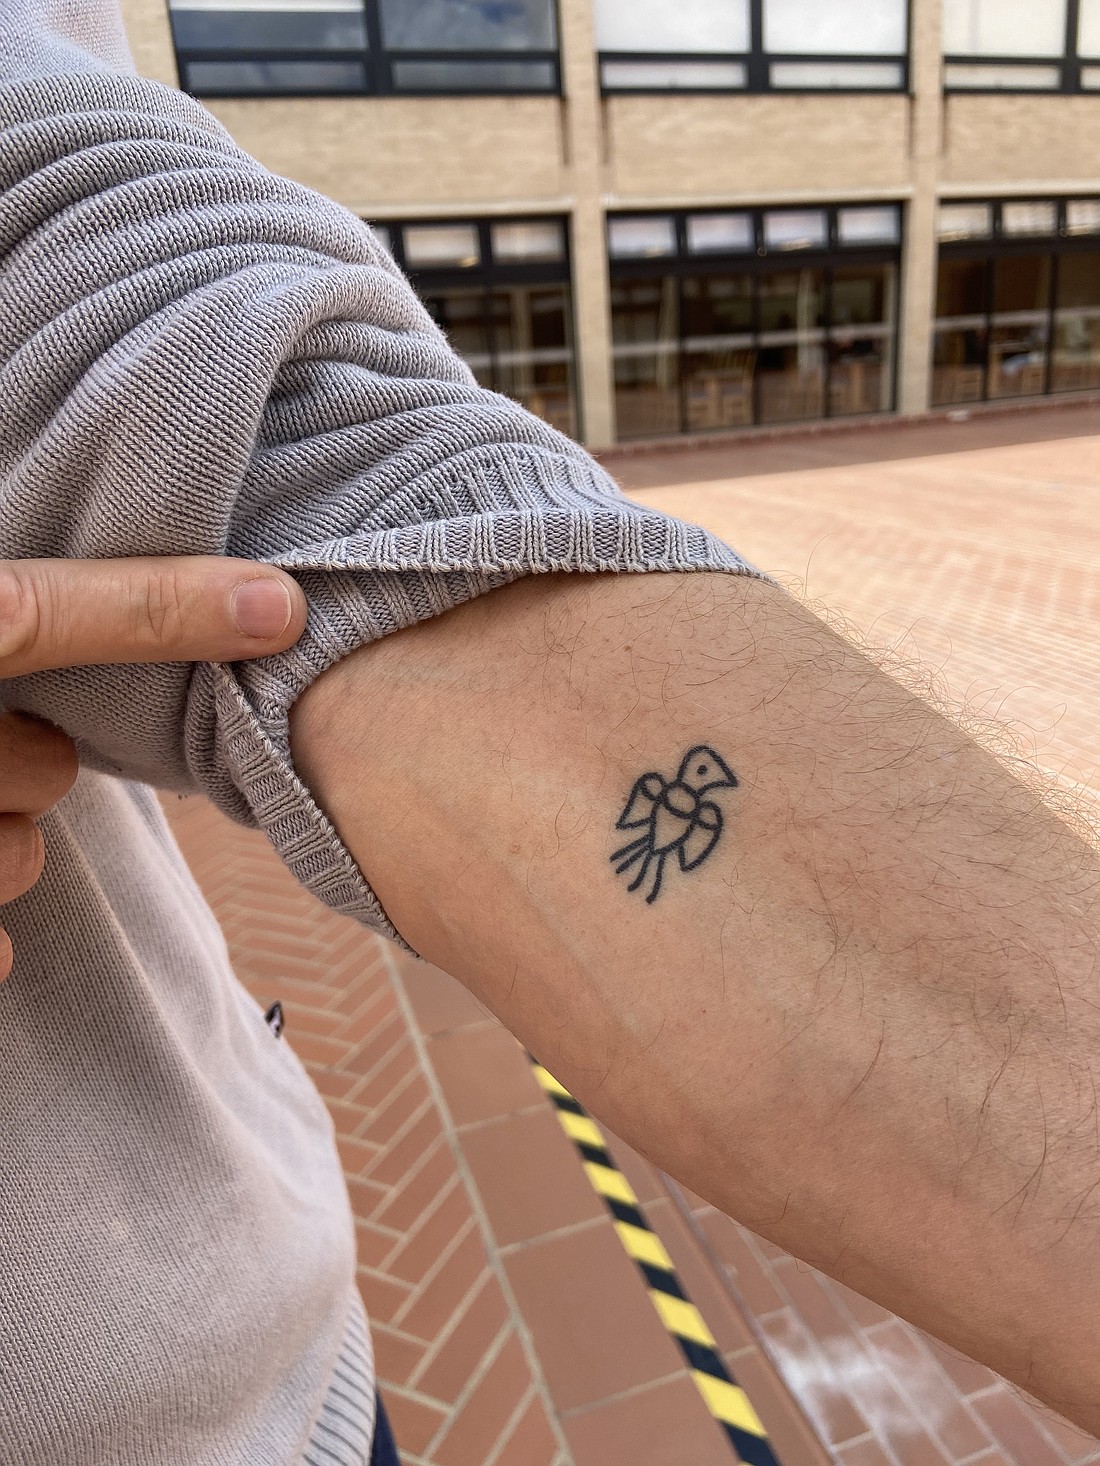 Jesuit Father Gustavo Morello, a professor of sociology of religion at Boston College, shows an arm tattoo during a theology conference in Bogotá, Colombia, Nov. 28, 2023. He told CNS the design is from 1600 and that he received it on pilgrimage to Loreto, Italy. (CNS photo/Justin McLellan)